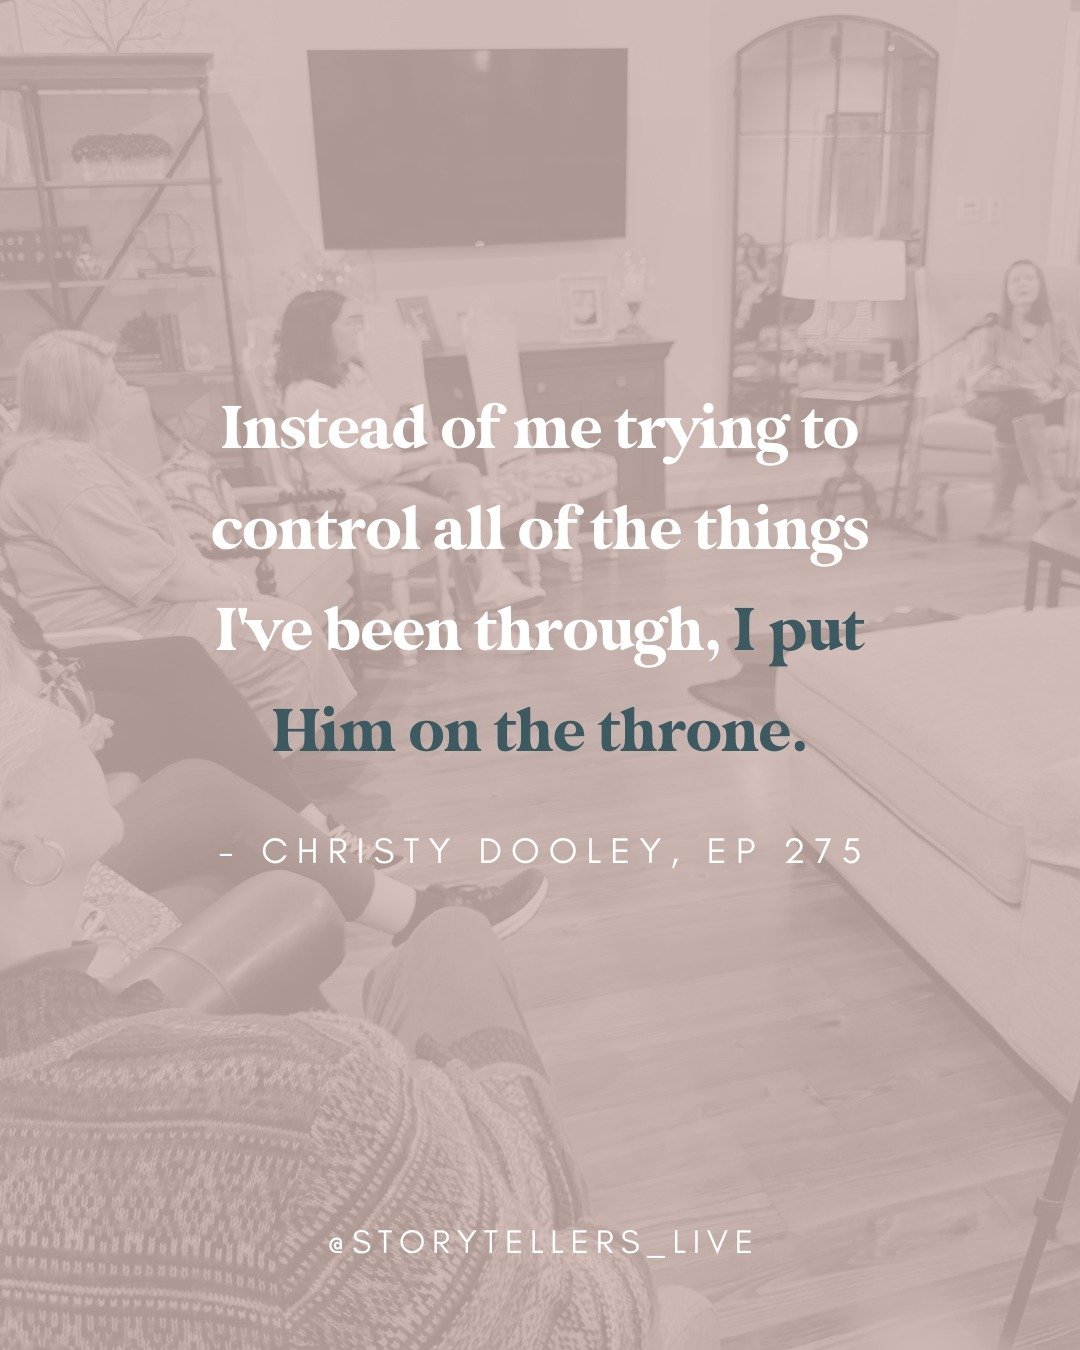 You find freedom when you relinquish control. ⁠
⁠
Listen to Christy's story and be encouraged as she shares how she experienced the goodness of letting the Lord take control of her life &gt; &gt; &gt; link in bio⁠
⁠
#StoryTellersLive #PodcastQuote #Y